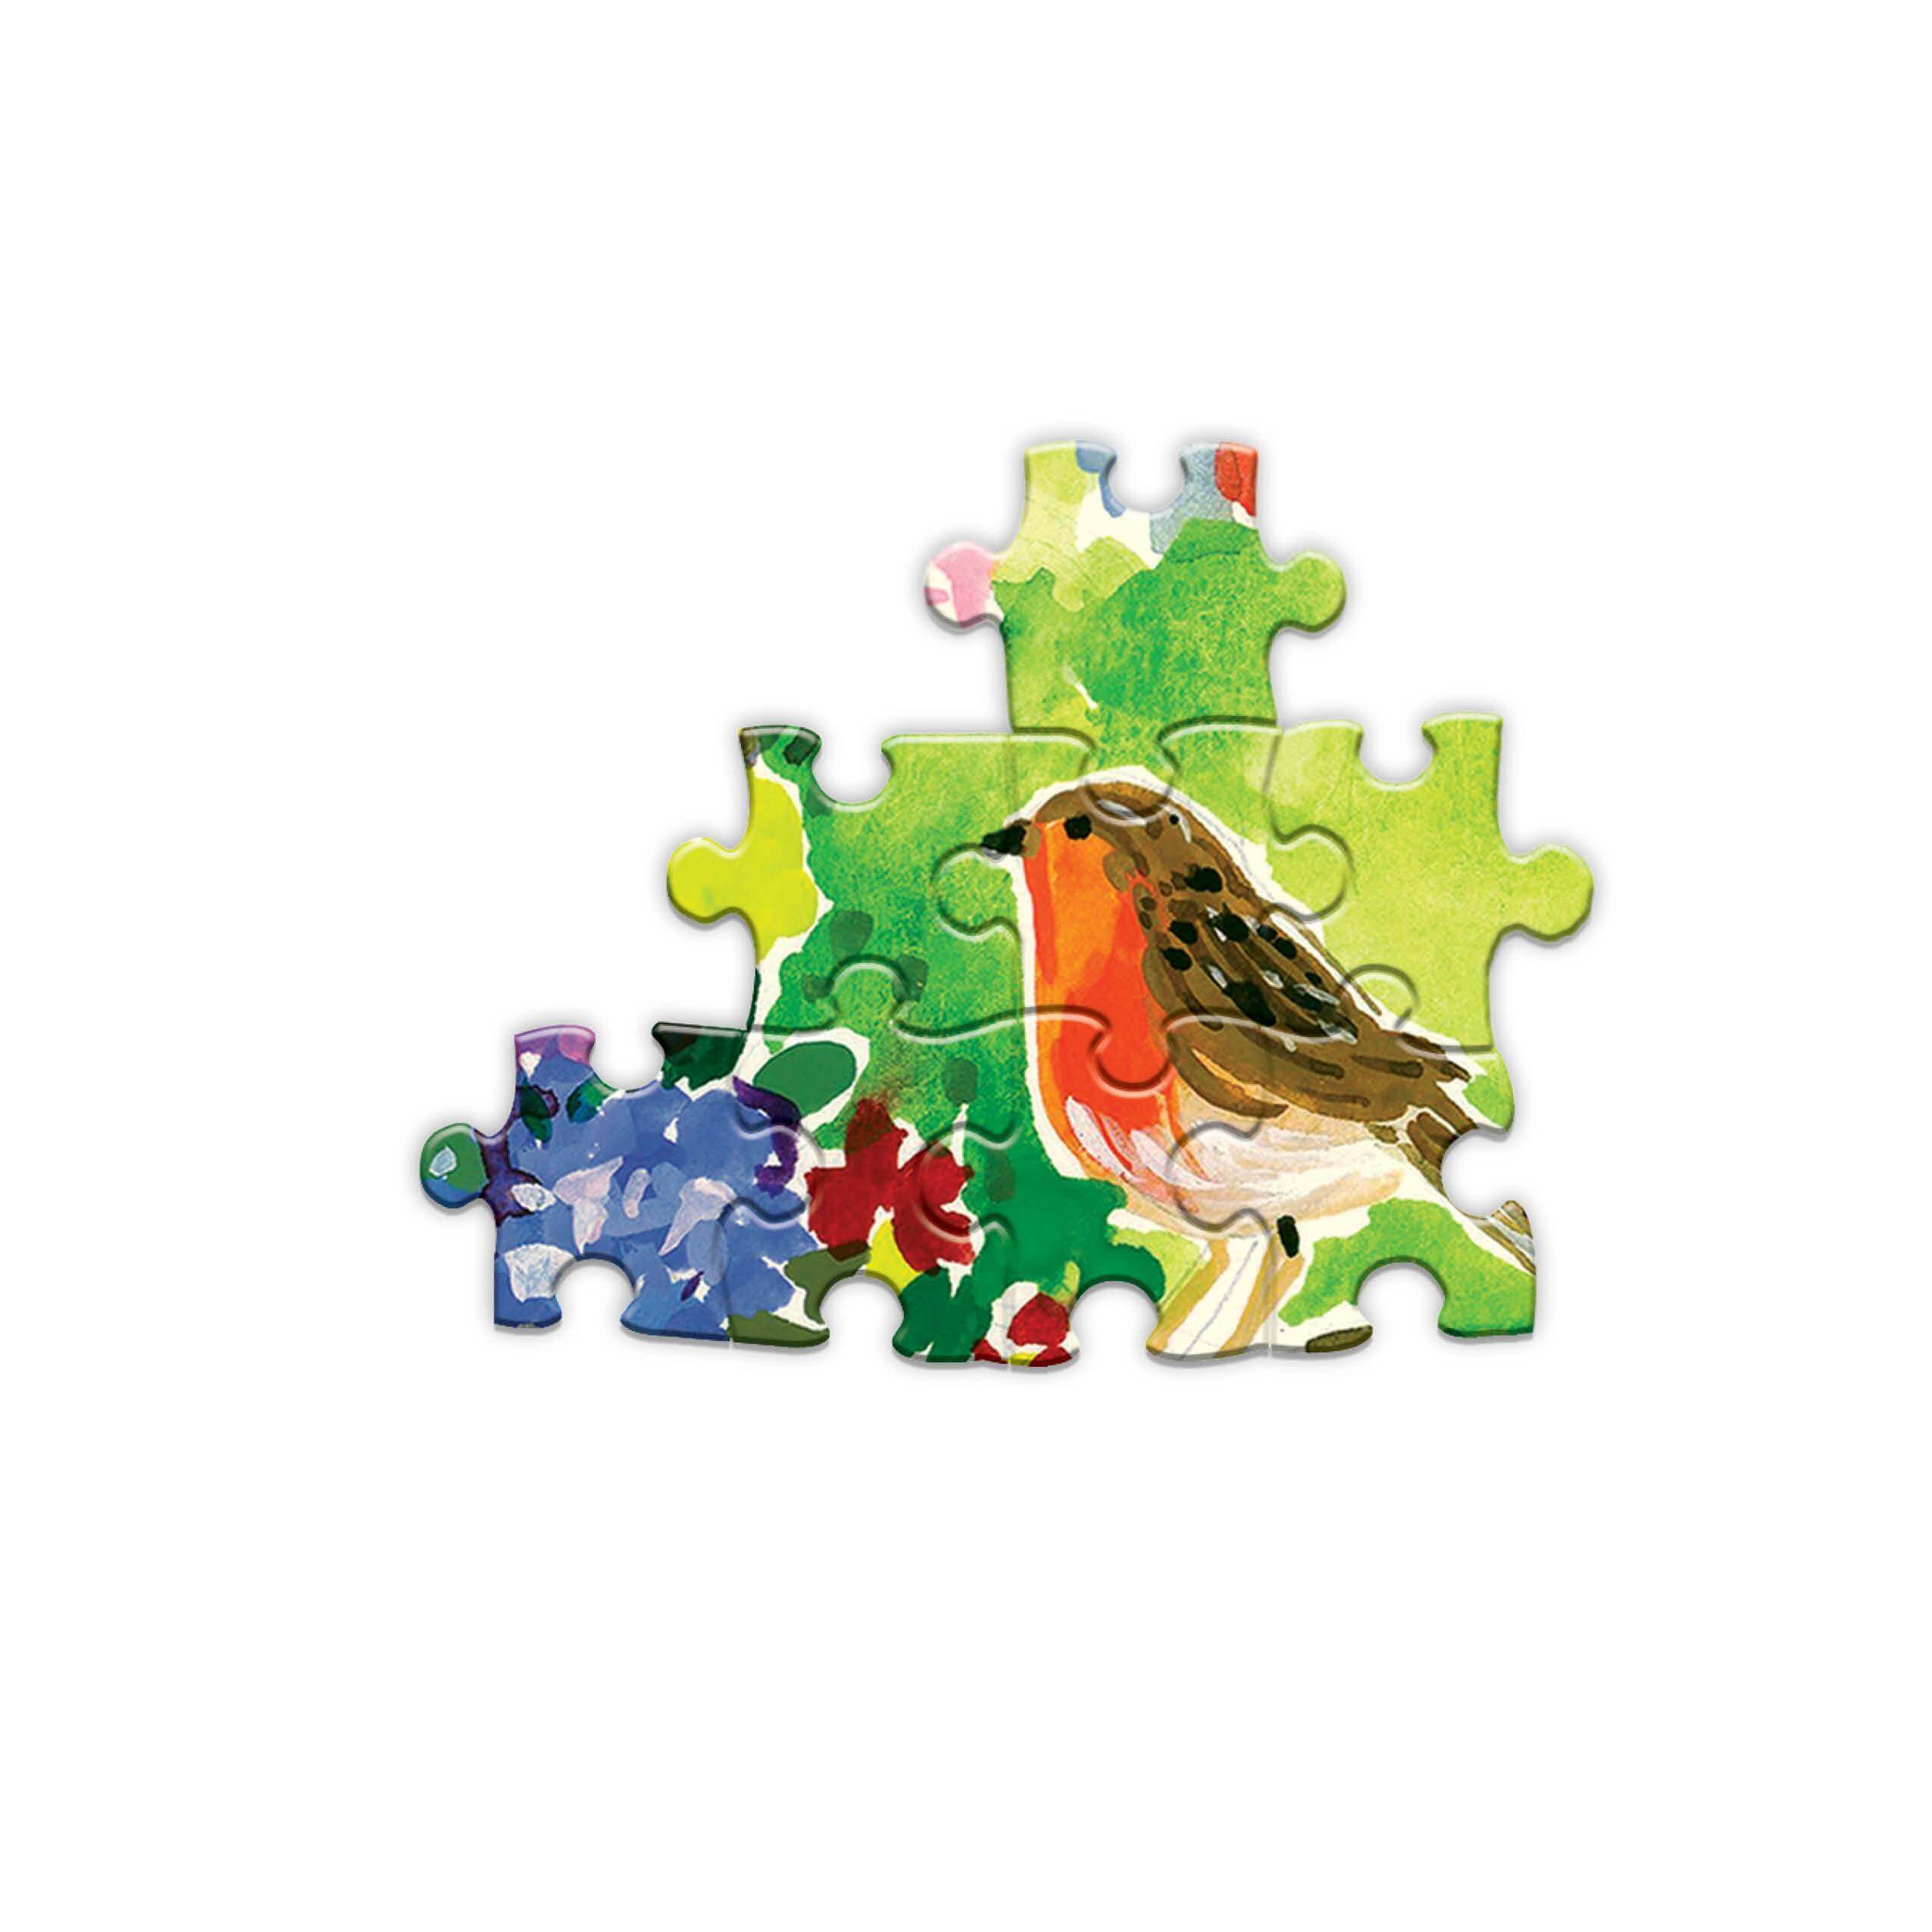 eeBoo - Piece and Love Seagull Garden 1000 Piece Rectangular Adult Jigsaw Puzzle completed section of puzzle showing bird